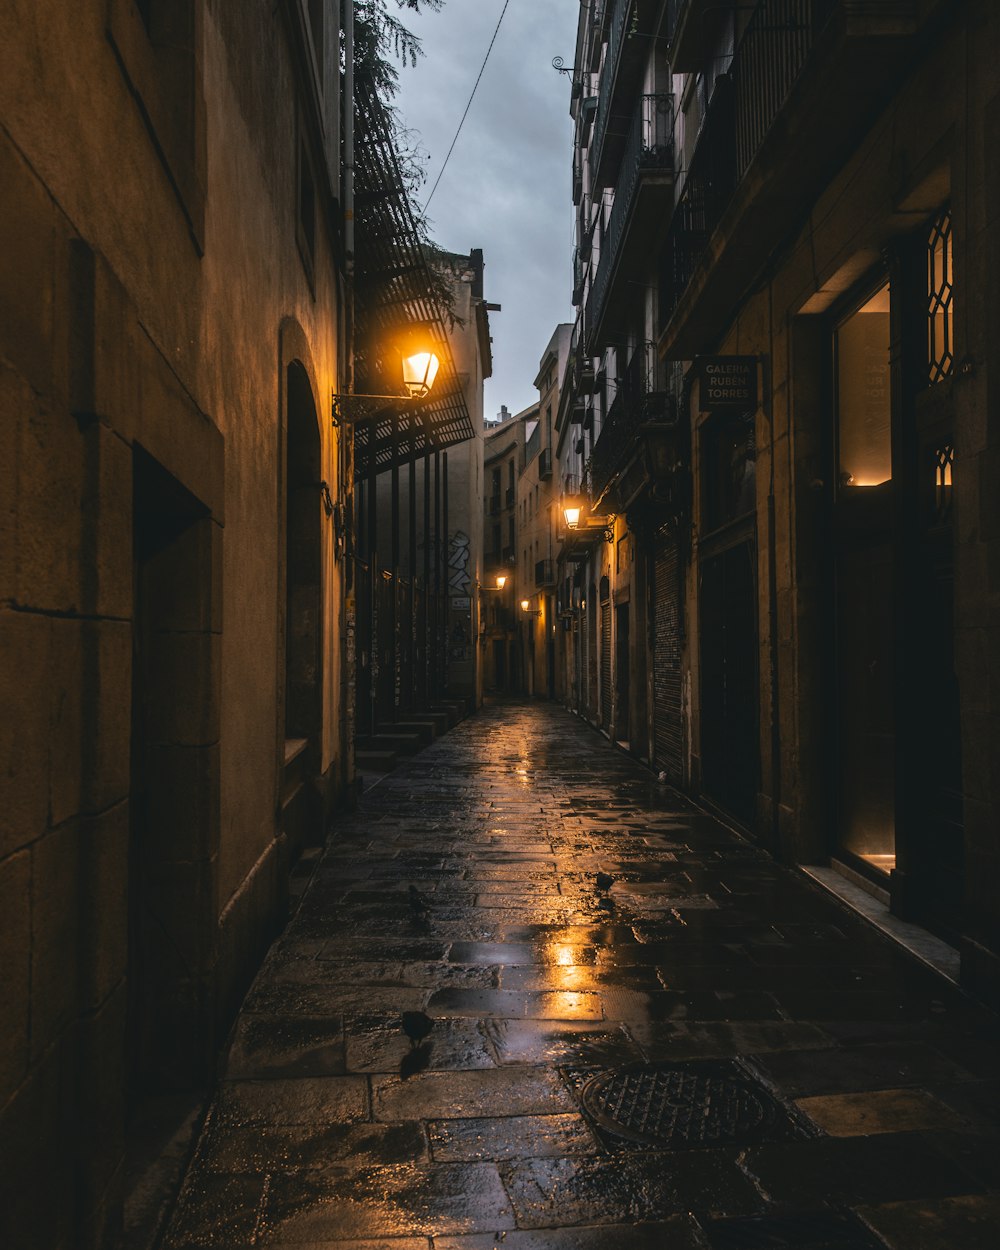 a dark alley way with a street lamp on a rainy night